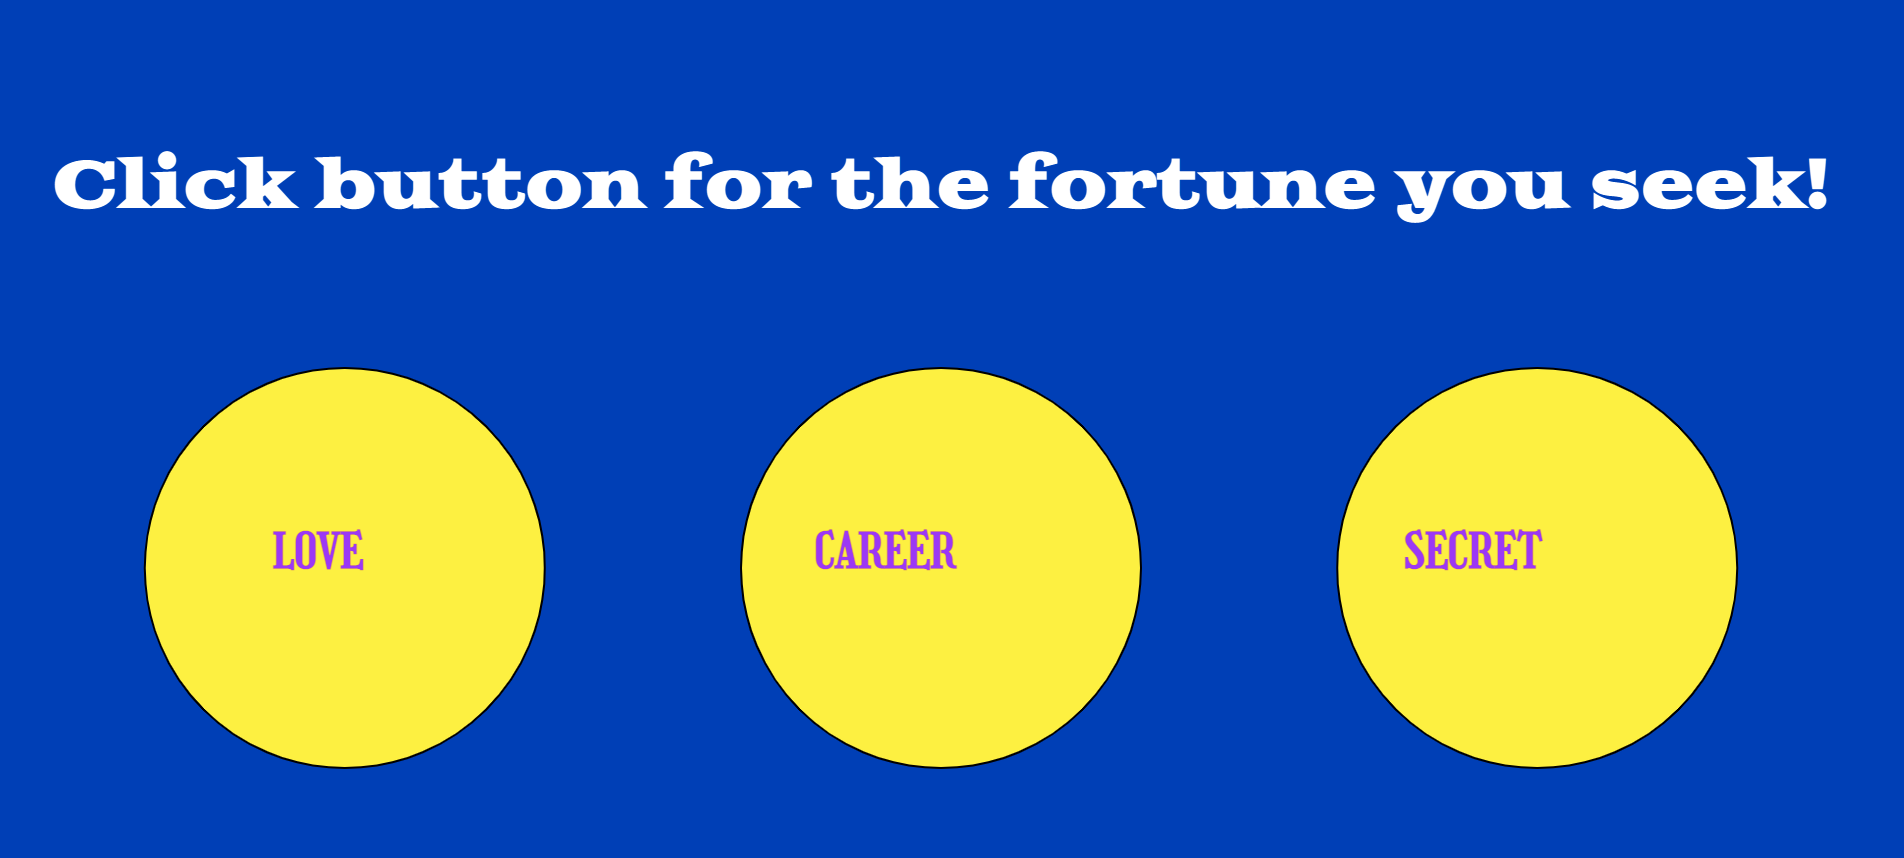 digital fortune teller with three categories to choose from: career, love and secret.